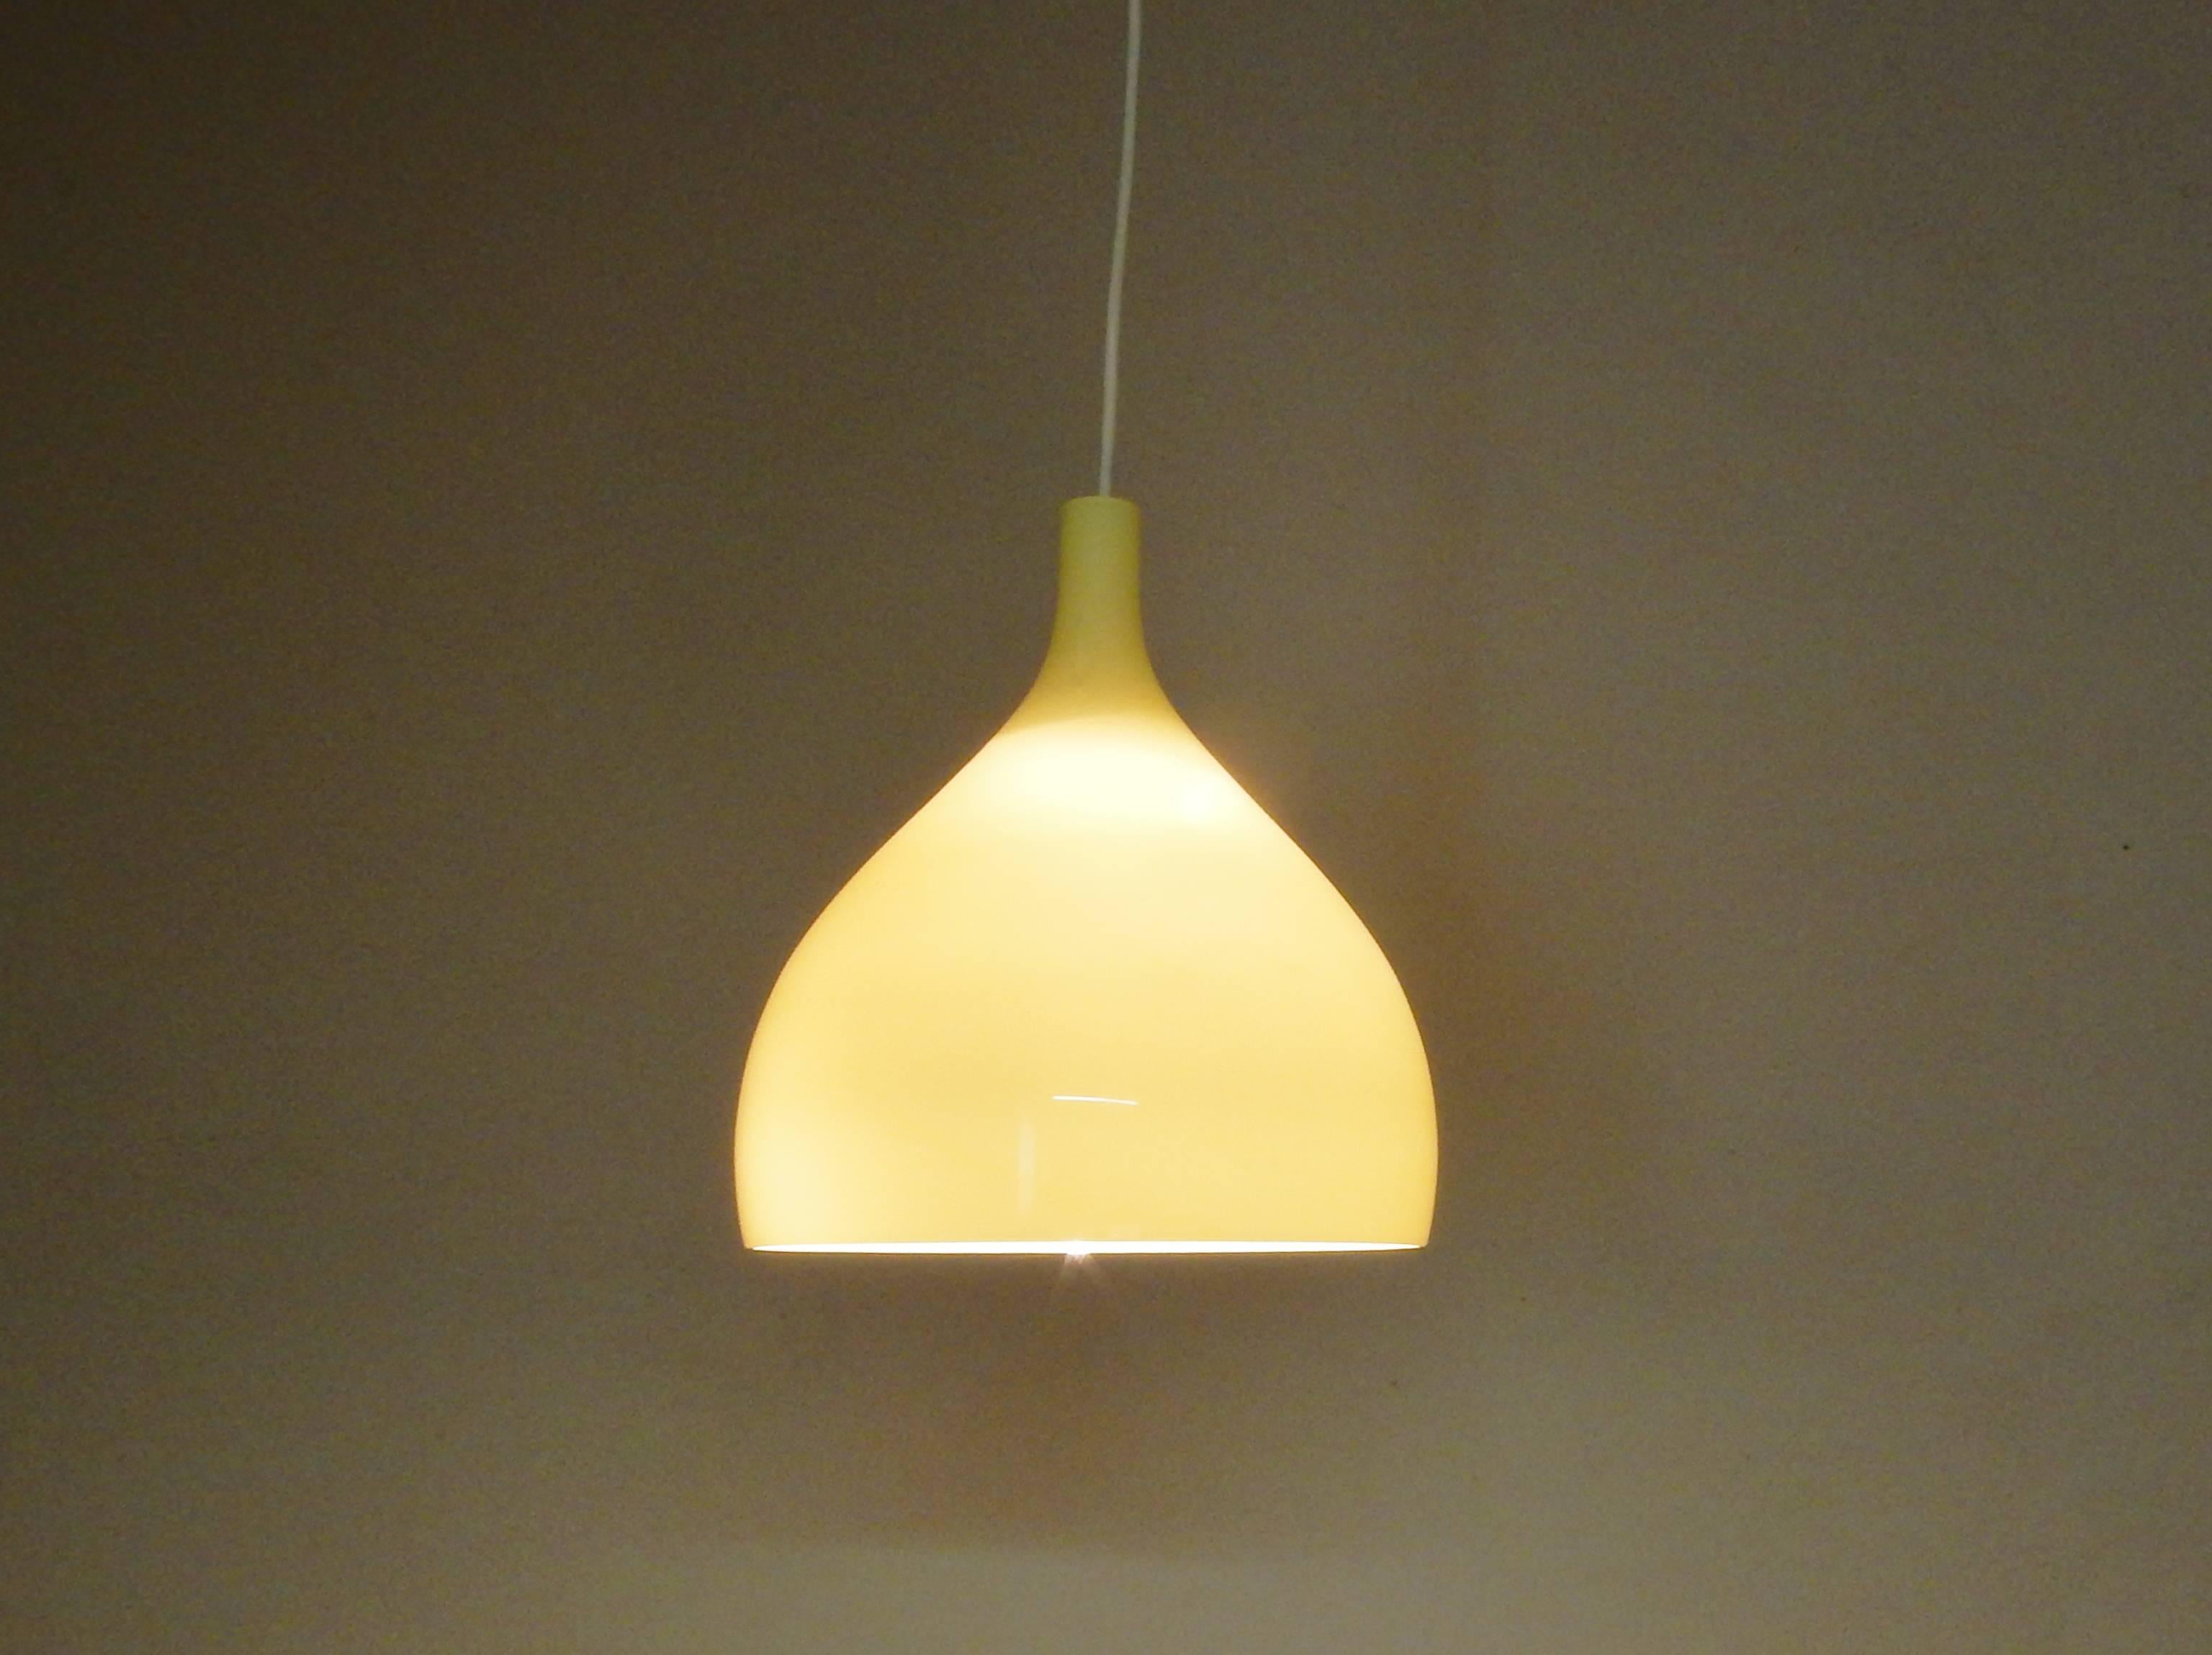 This glass pendant light is of a beautiful soft toned yellow color. The white inside softens and spreads the light beautifully. This light is a design by Massimo Vignelli for the Italian glass company of Venini, from the island of Murano.

It